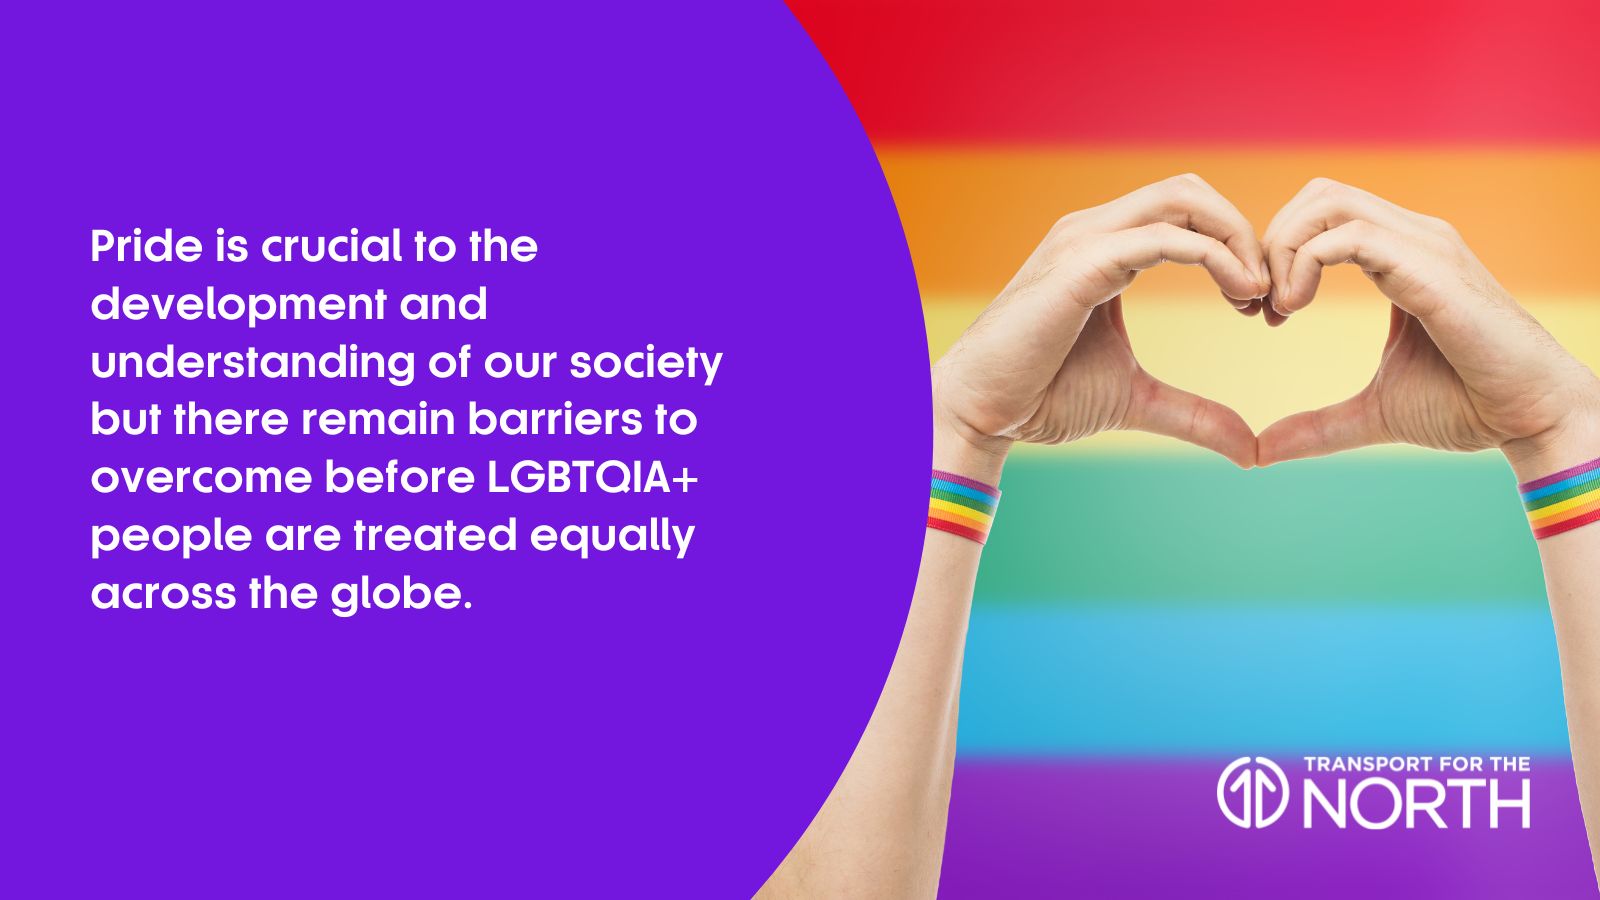 Pride is crucial to the development and understanding of our society but there remain barriers to overcome before LGBTQIA+ people are treated equally across the globe.